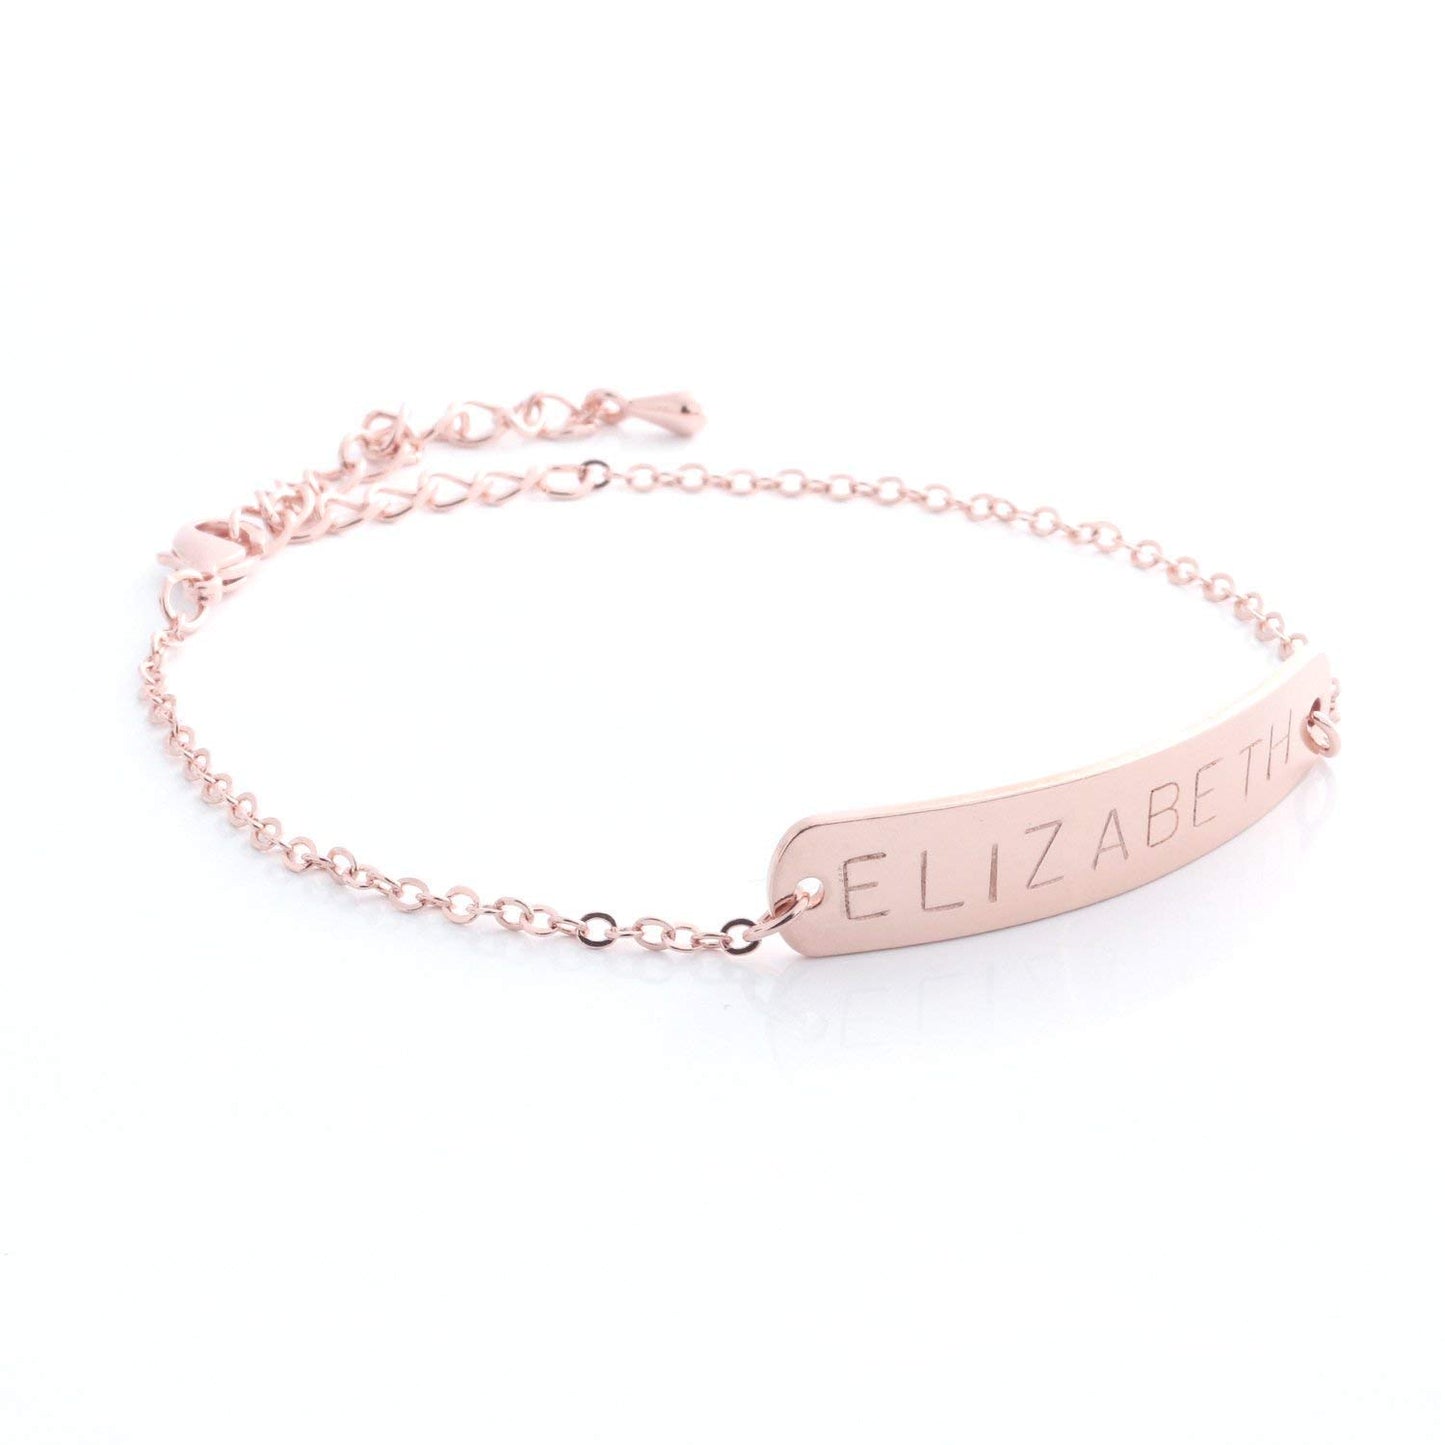 Buy Custom Name Bar Bracelet - Personalized Elegance in 16K Gold, Silver, and Rose Gold at Petite Boutique